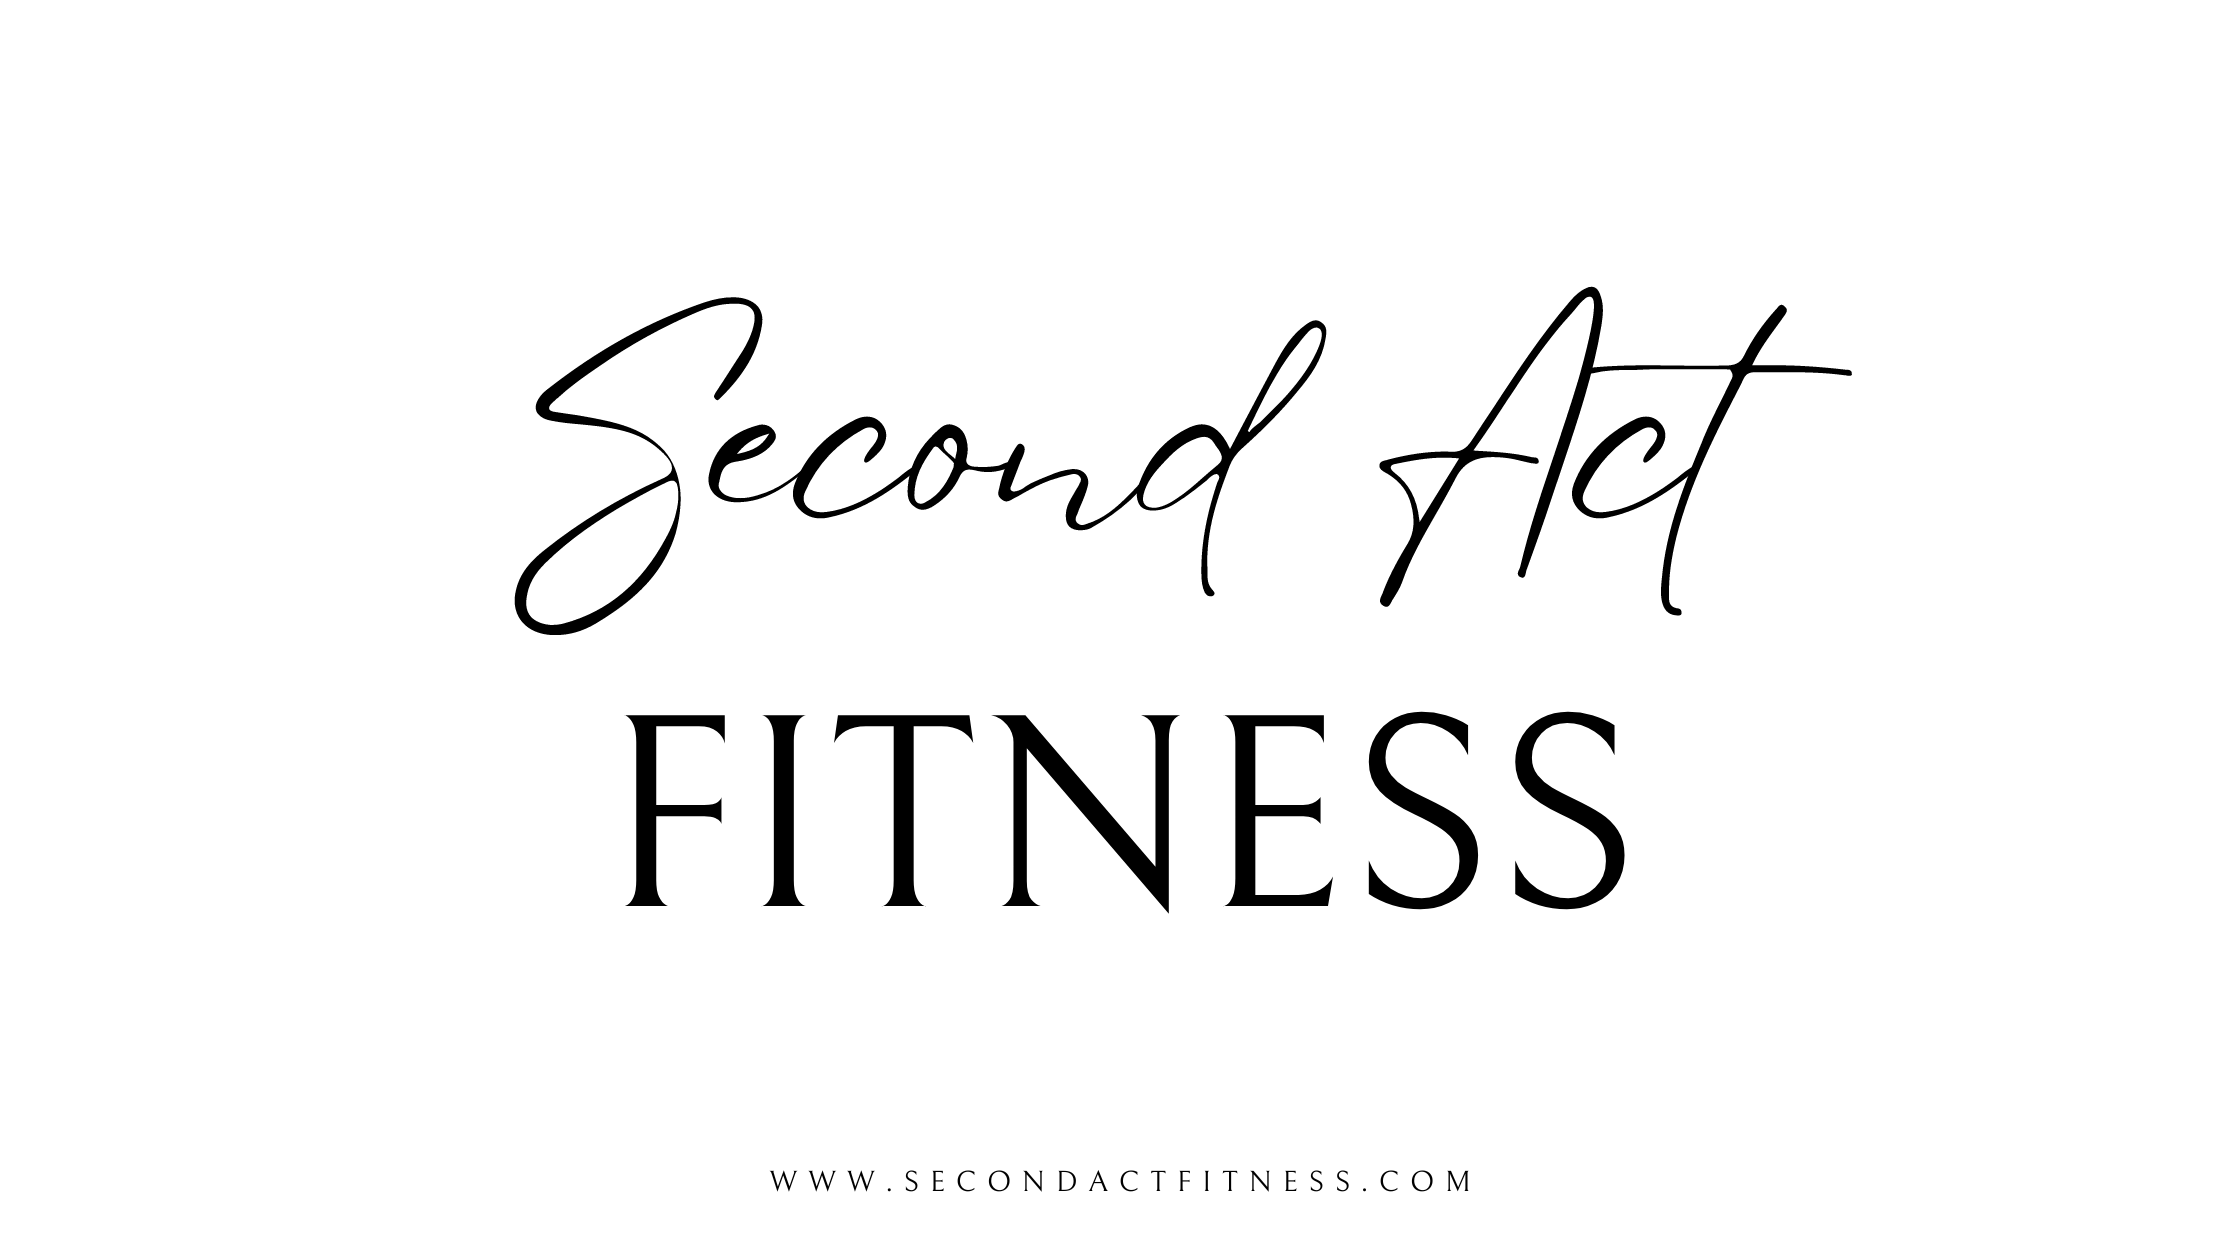 Second Act Fitness